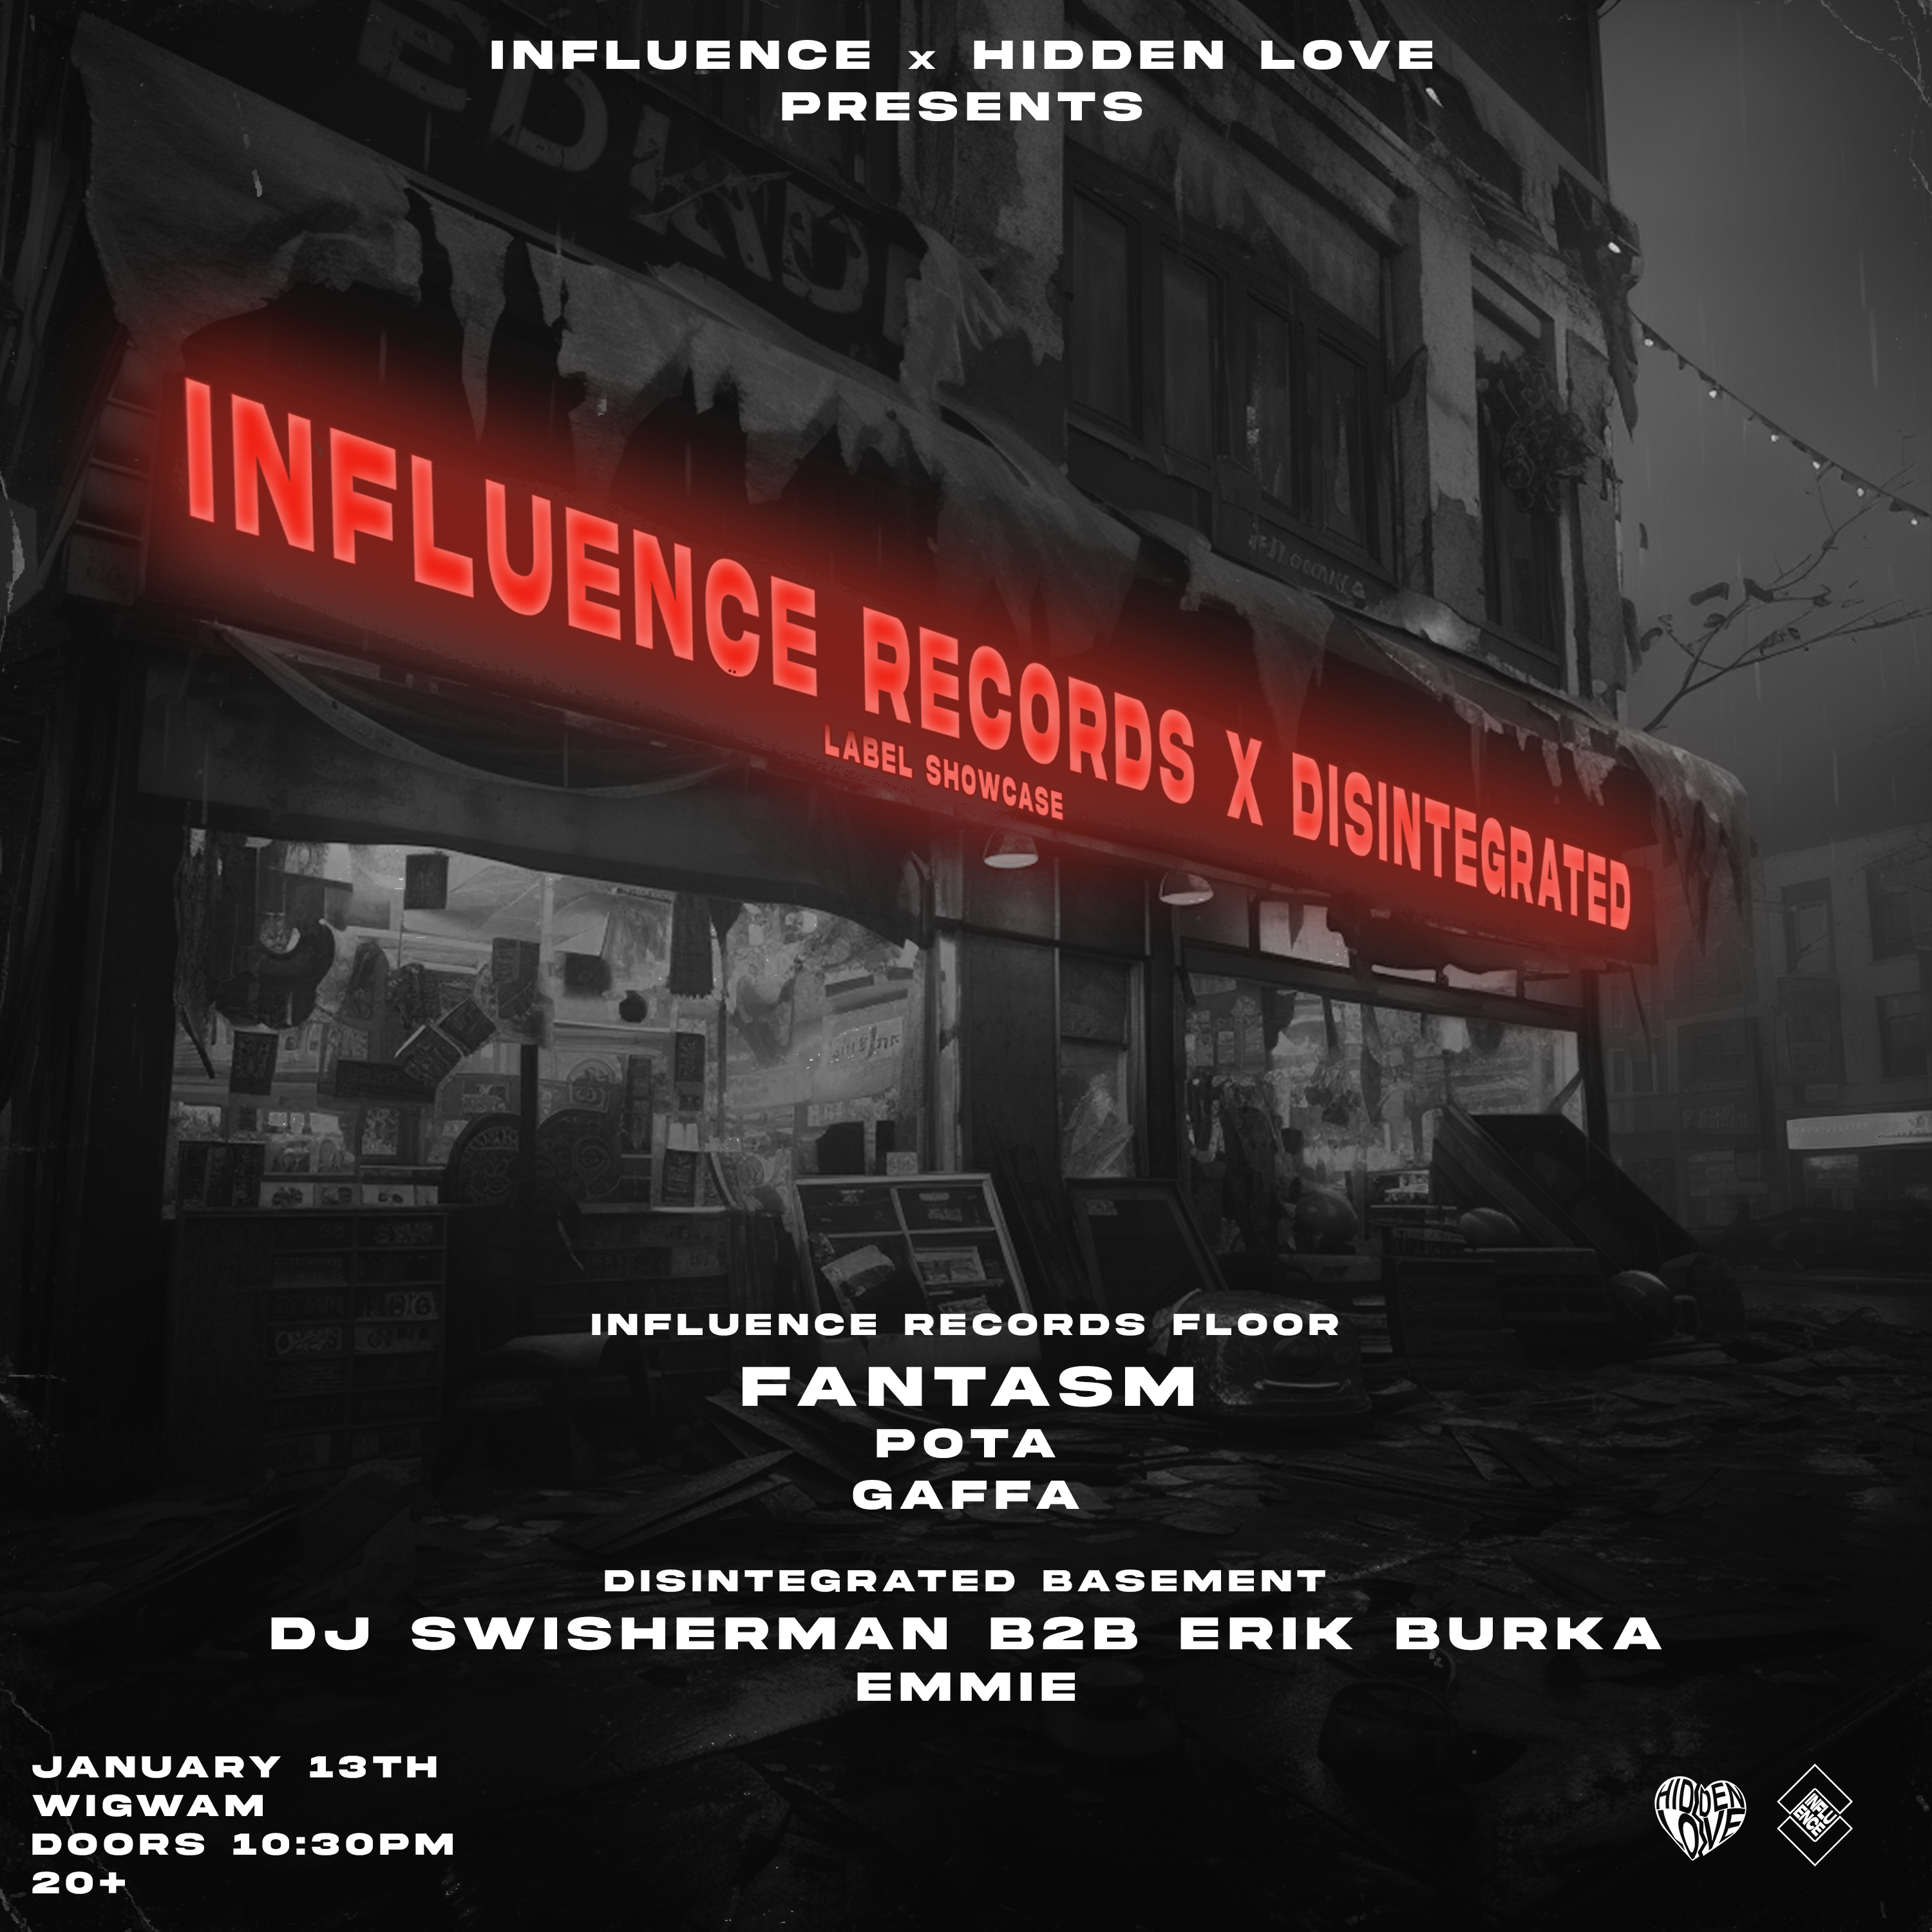 INFLUENCE X HIDDEN LOVE PRESENTS: INFLUENCE RECORDS X DISINTEGRATED LABEL SHOWCASE - フライヤー表